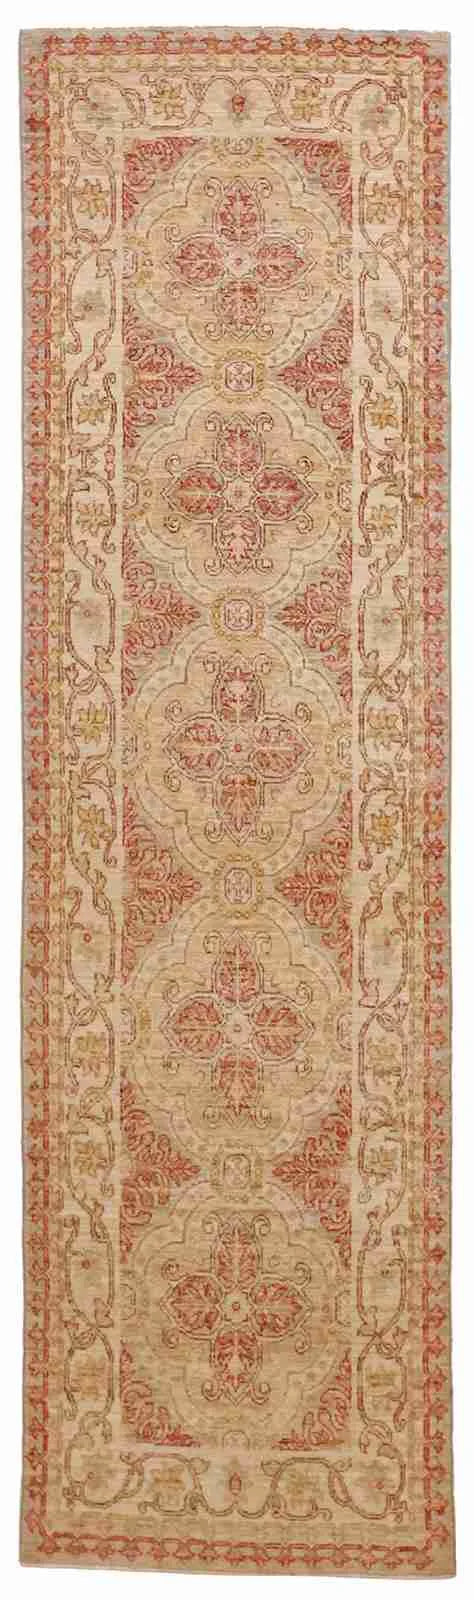 Runner - Sh Abbas Fine All Over Rectangle - Hand Knotted Rug